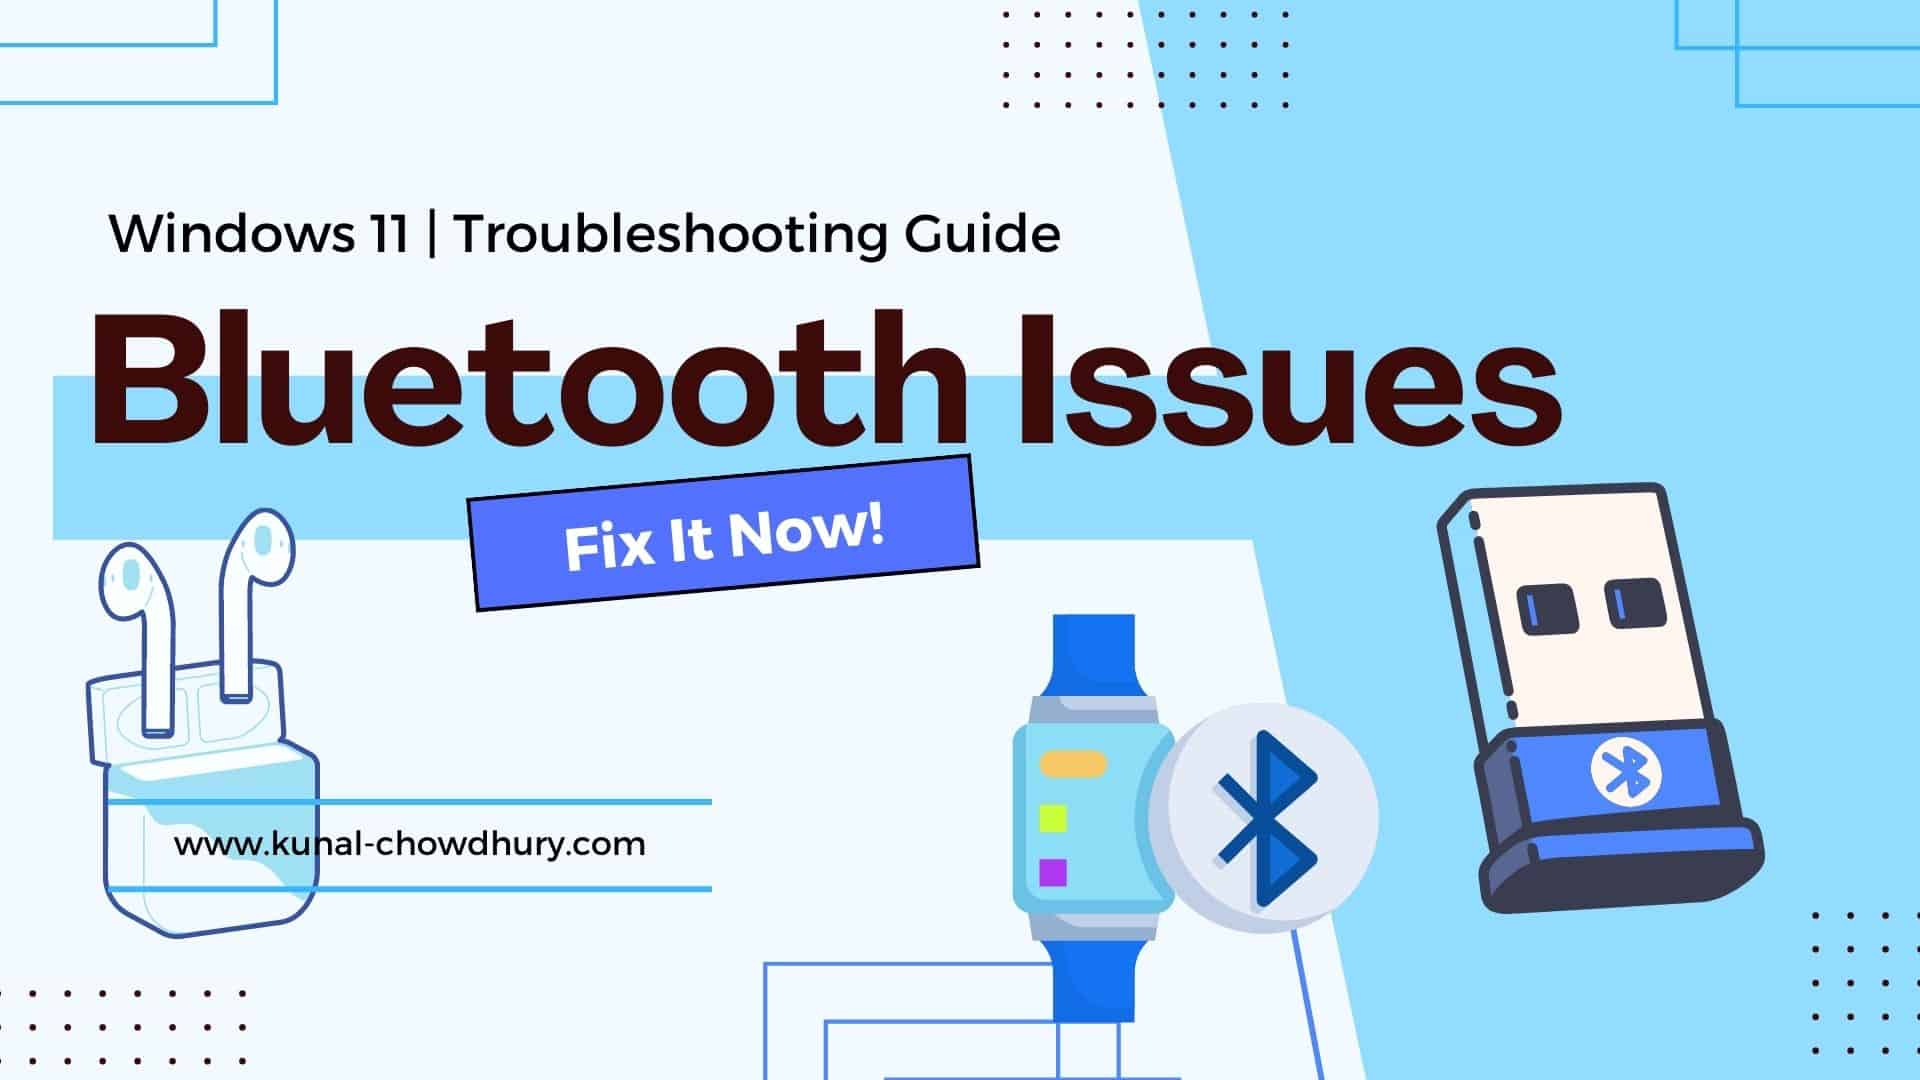 Say Goodbye to Bluetooth Woes: Windows 11 Troubleshooting Guide